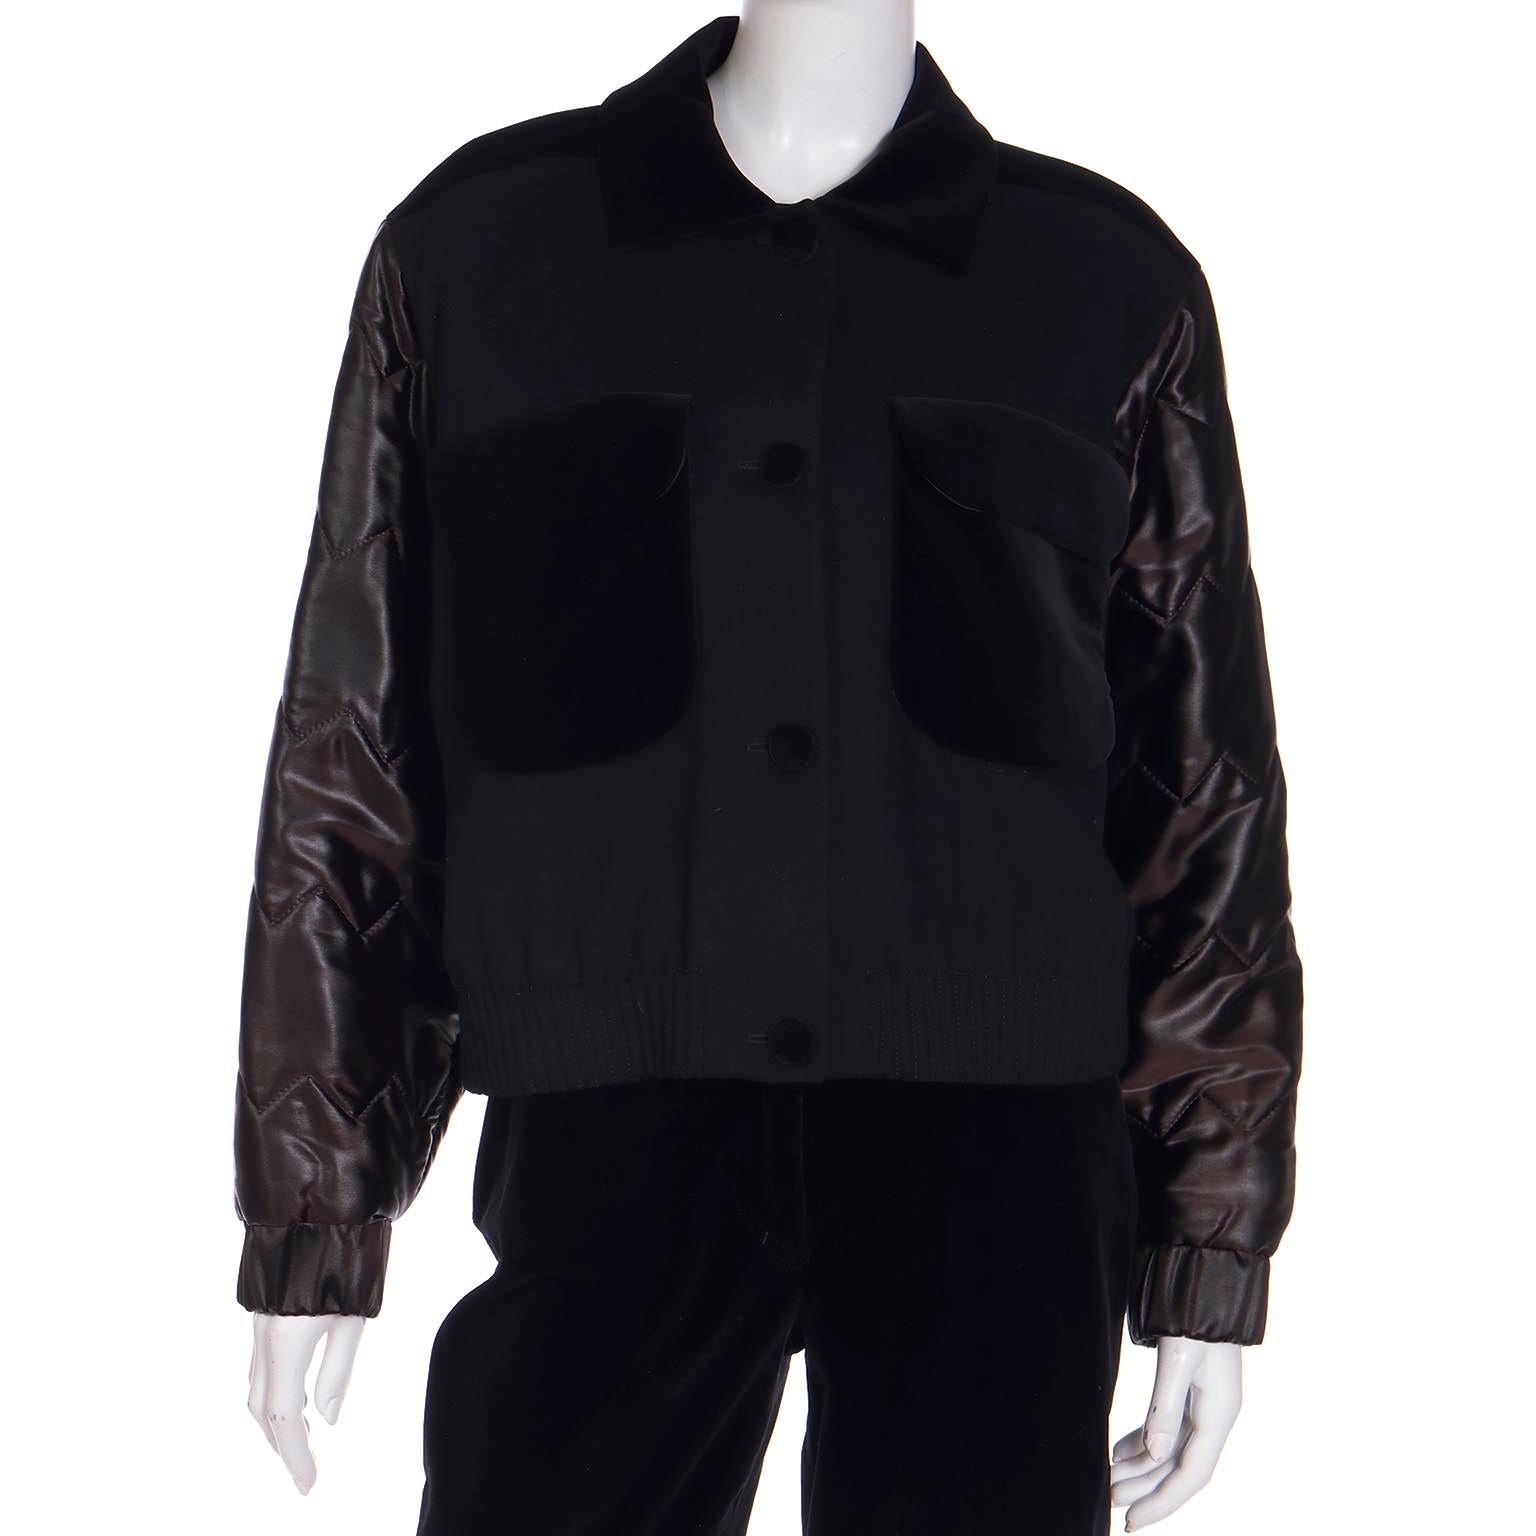 Vintage Louis Feraud Black Bomber Jacket w Quilted Satin Sleeves & Pants Outfit For Sale 4